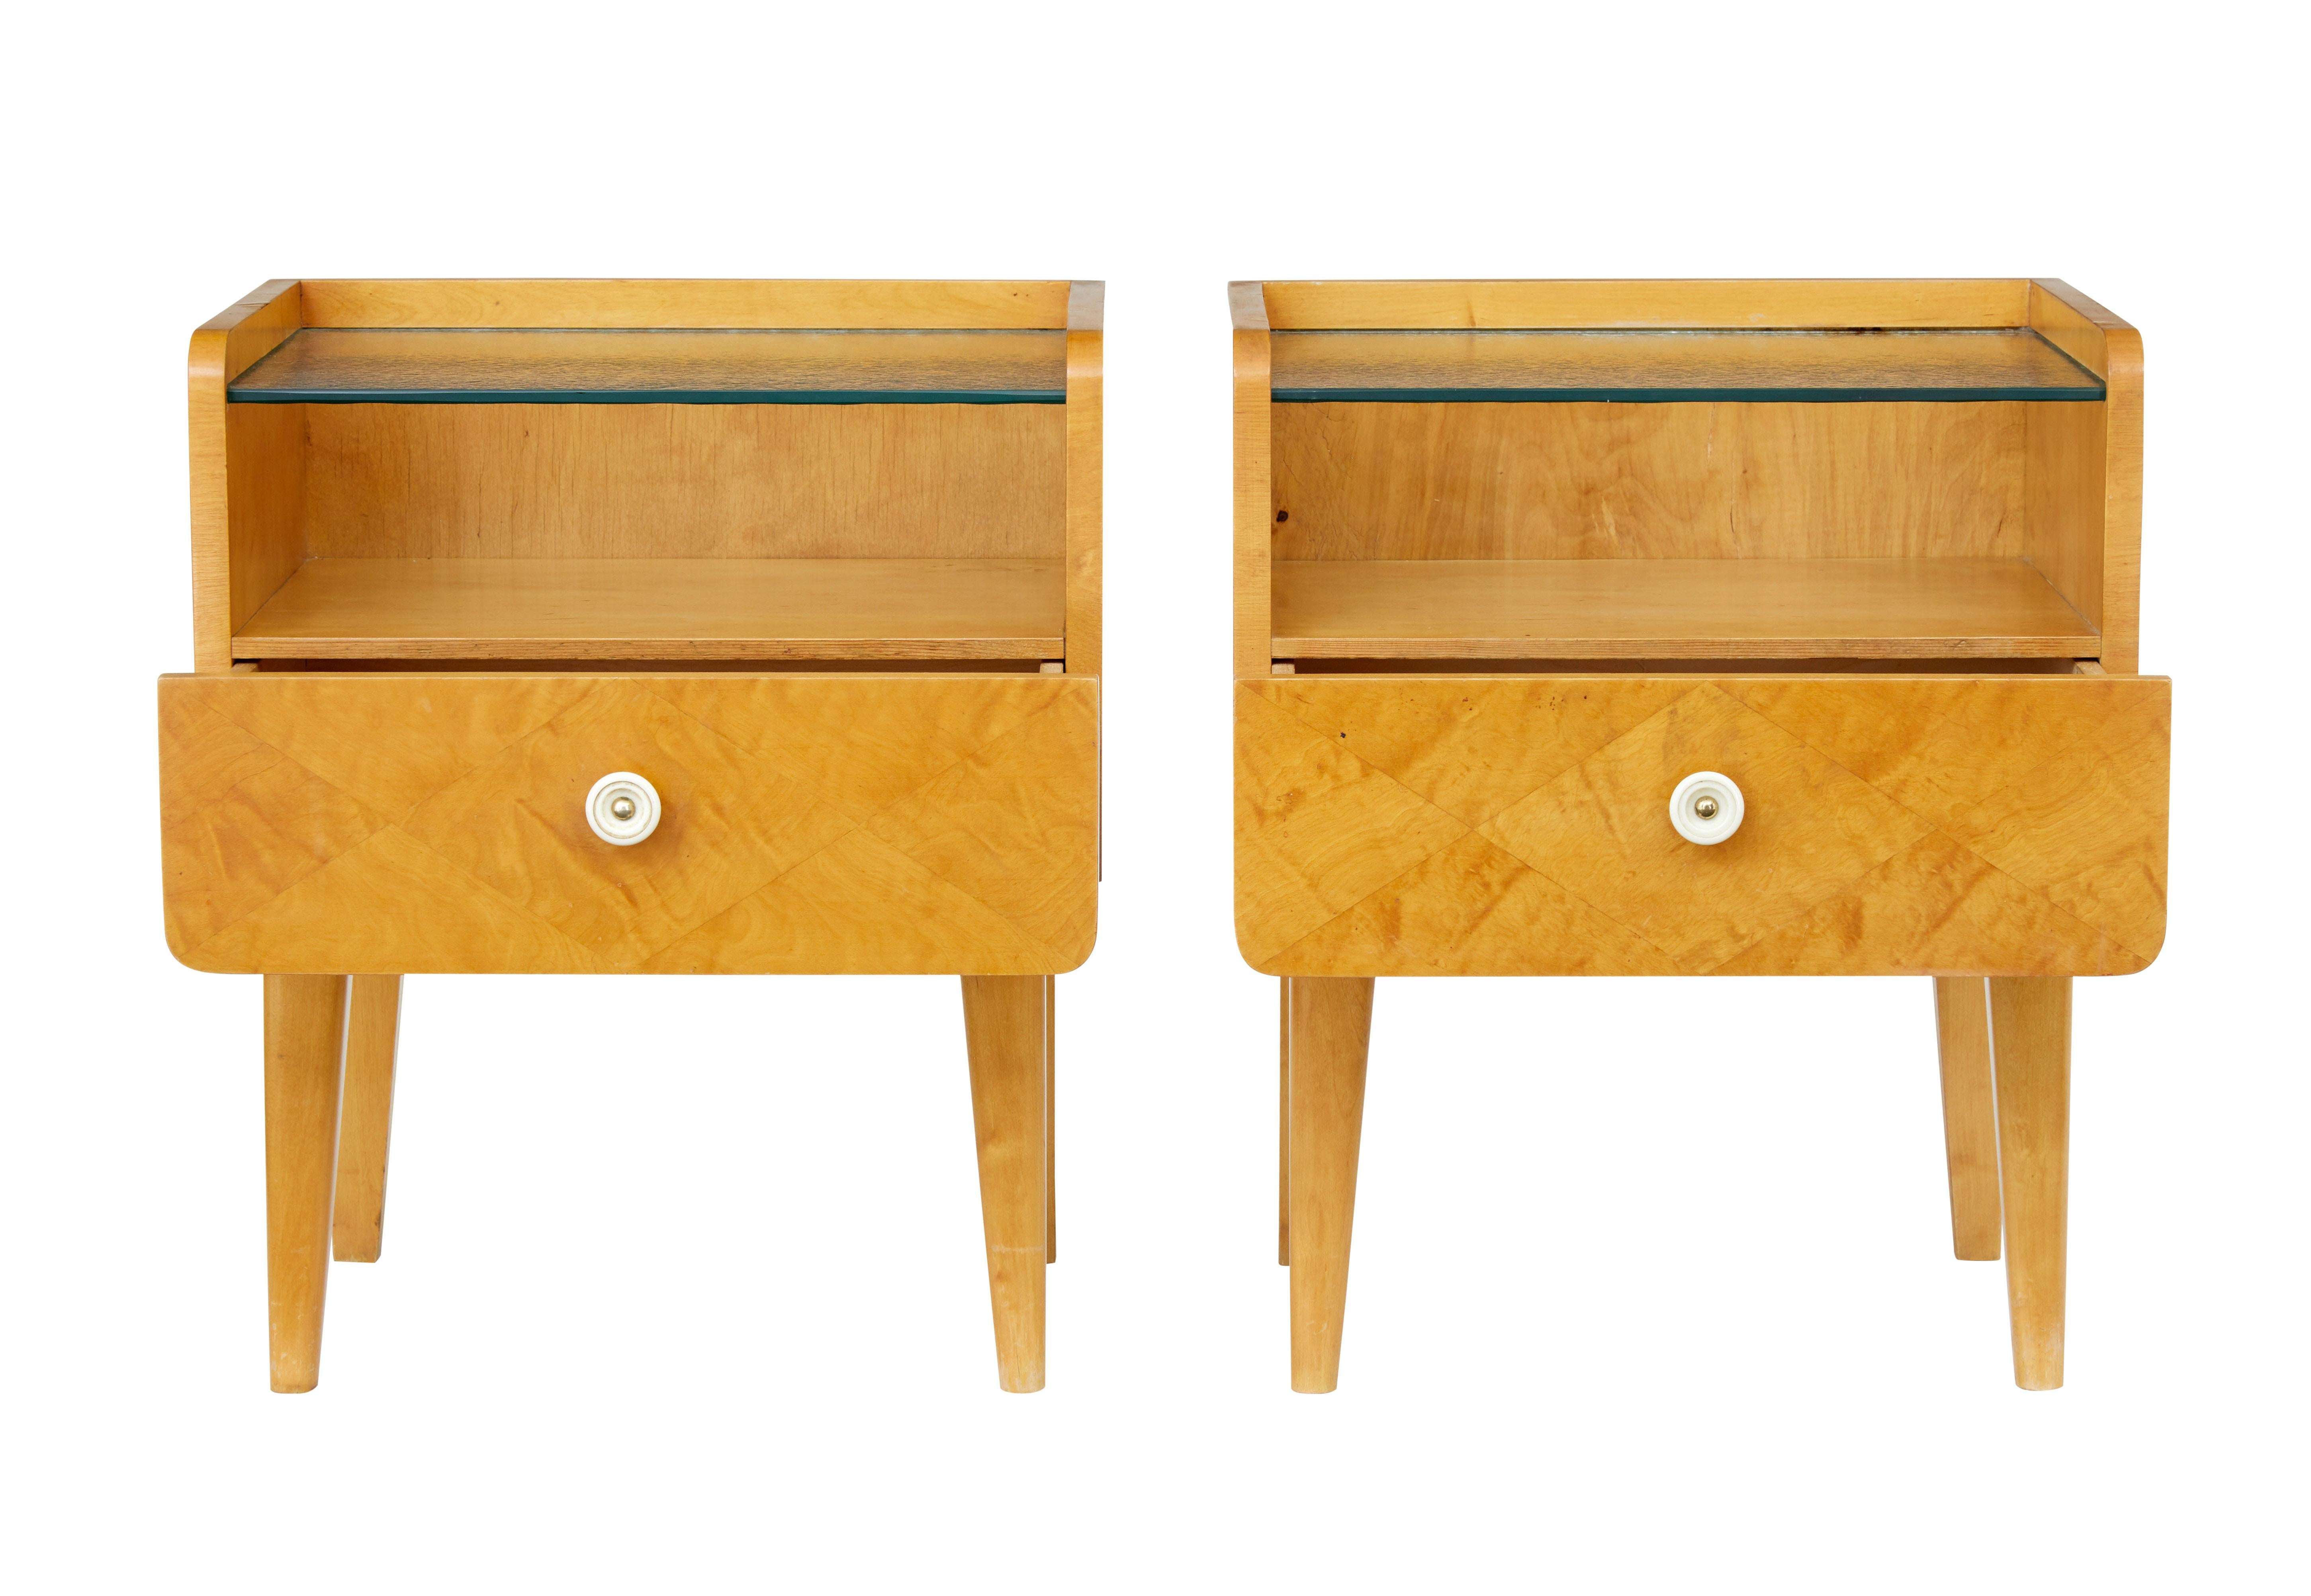 Pair of Scandinavian birch bedside tables, circa 1960.

Inset frosted glass top surface with a single patterned veneered drawer to the front. Standing on tapered legs.

Minor marks to wood work.